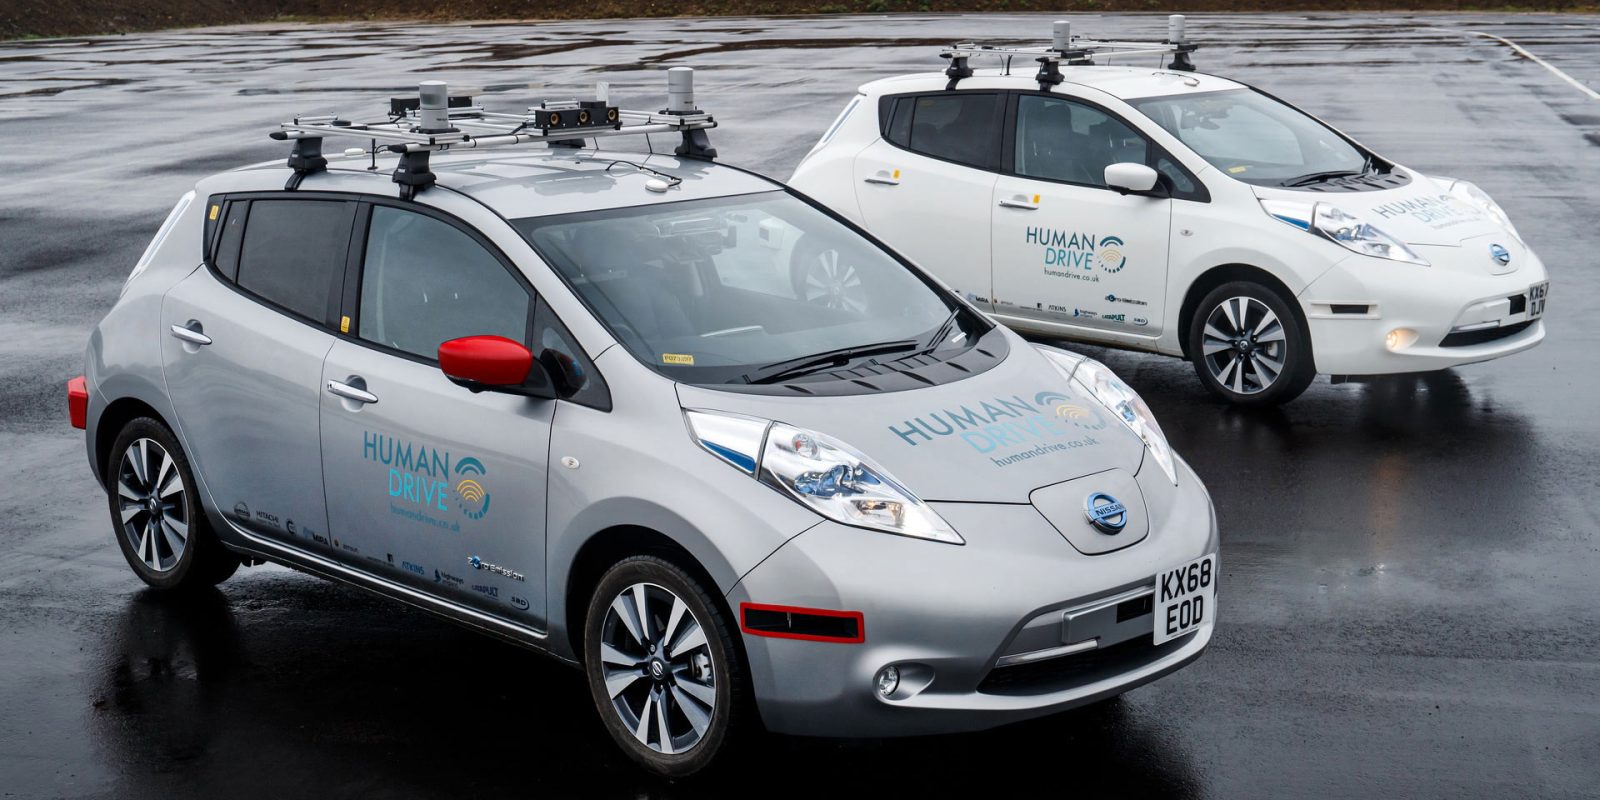 Self-driving Nissan Leafs in the UK